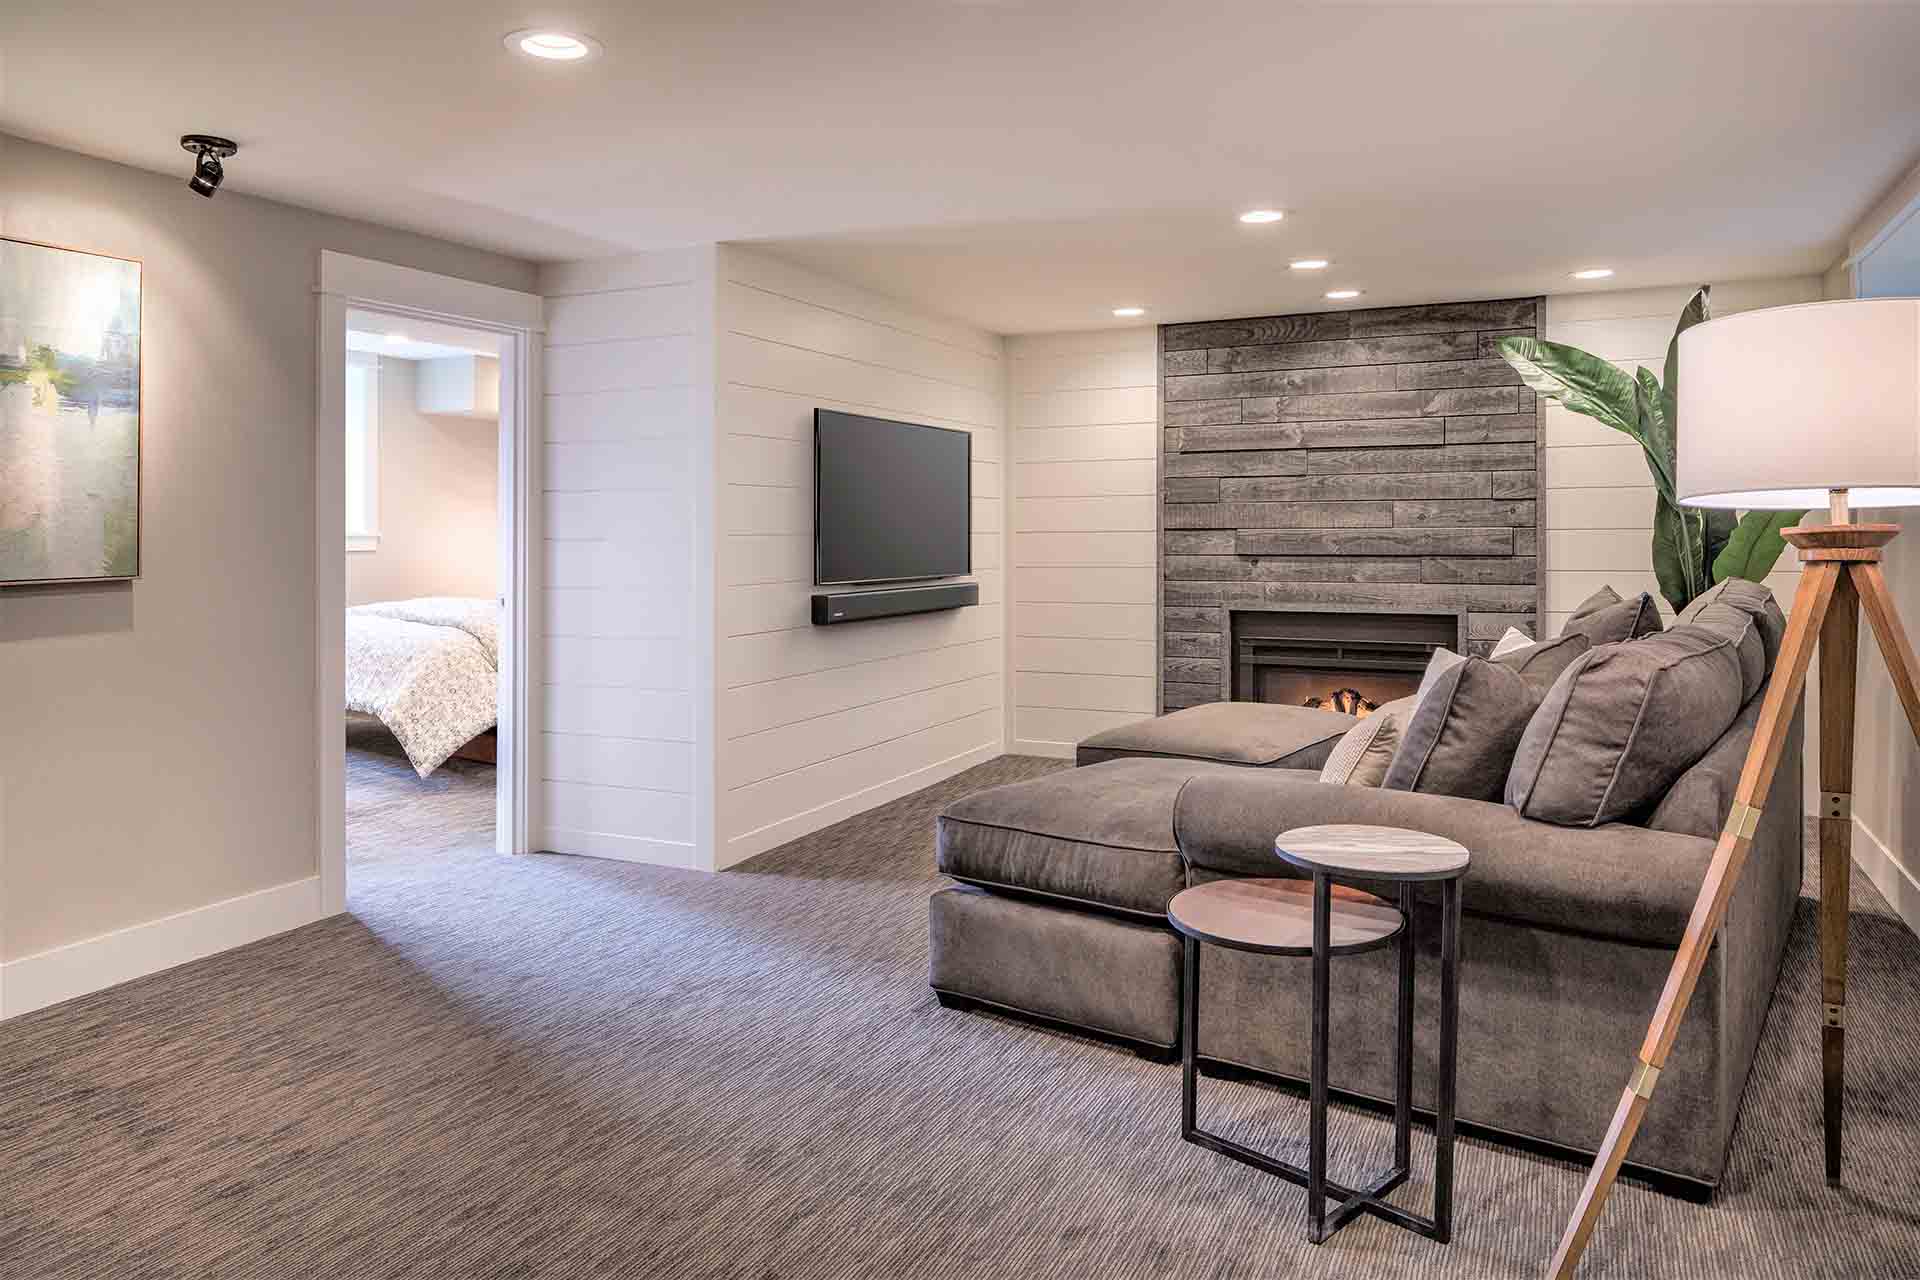 Basement sitting area with fireplace